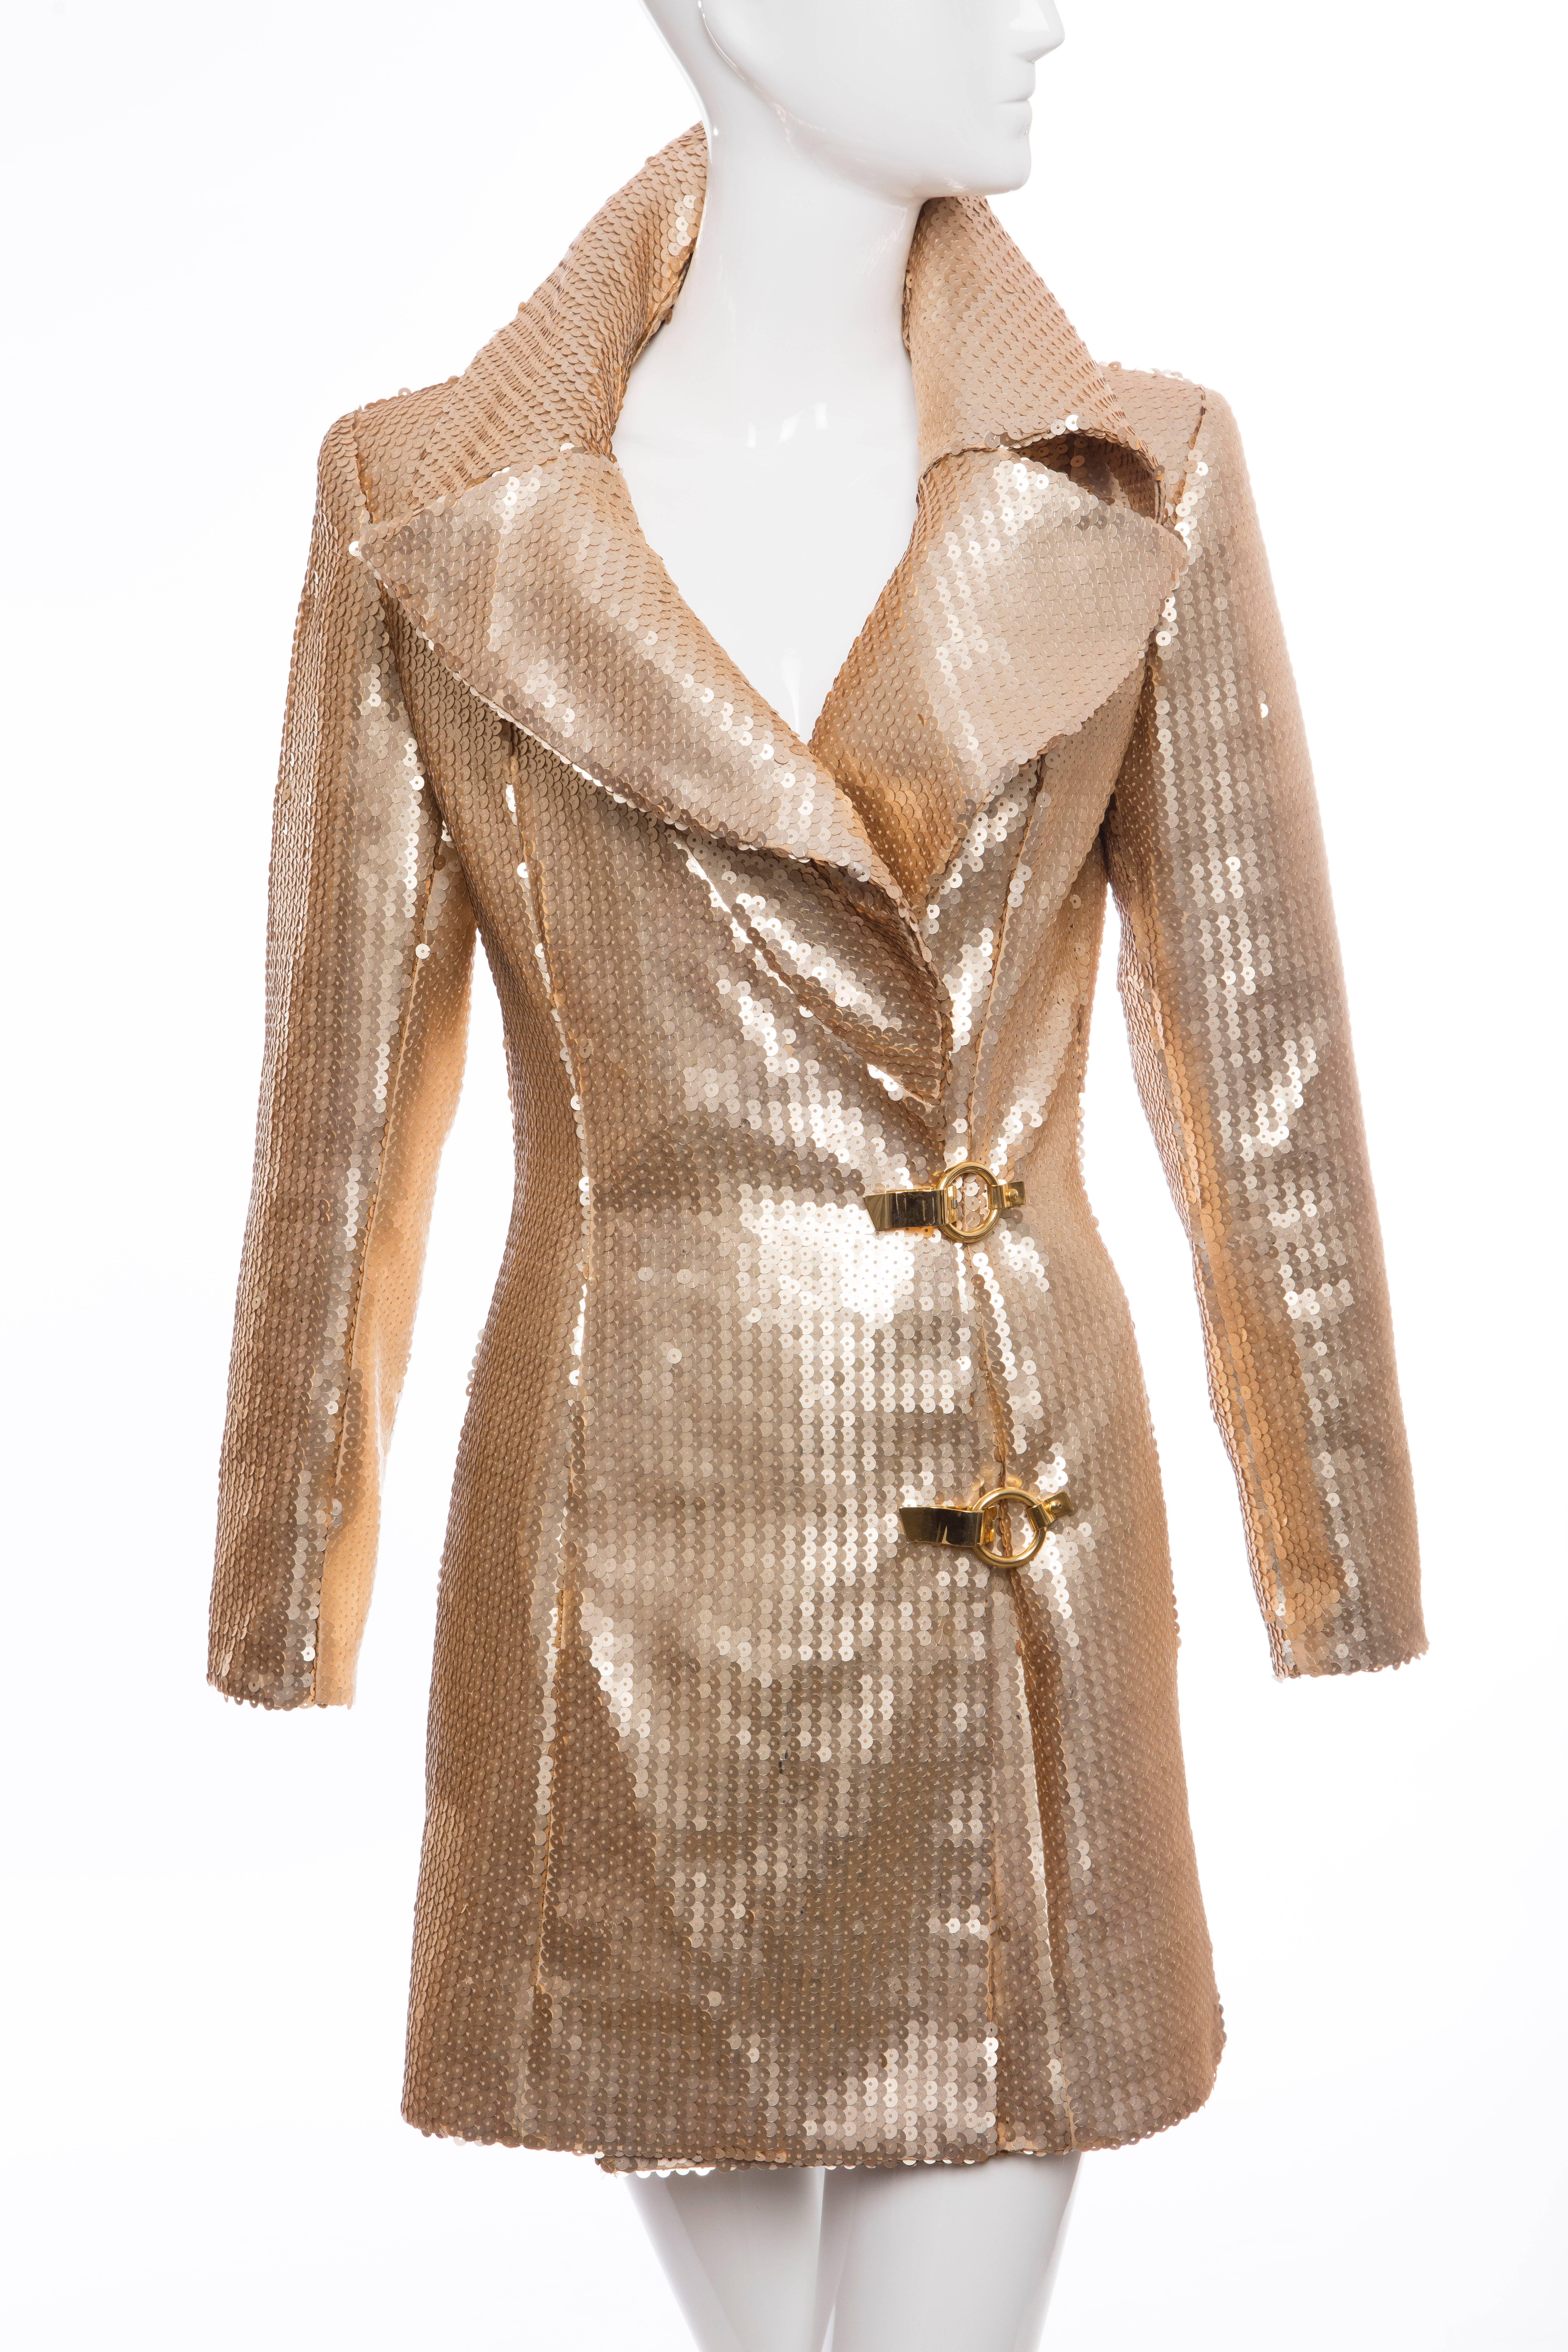 Claude Montana, circa 1980's, matte gold sequin jacket, two front pockets, gold-tone closures and fully lined.

US. 6